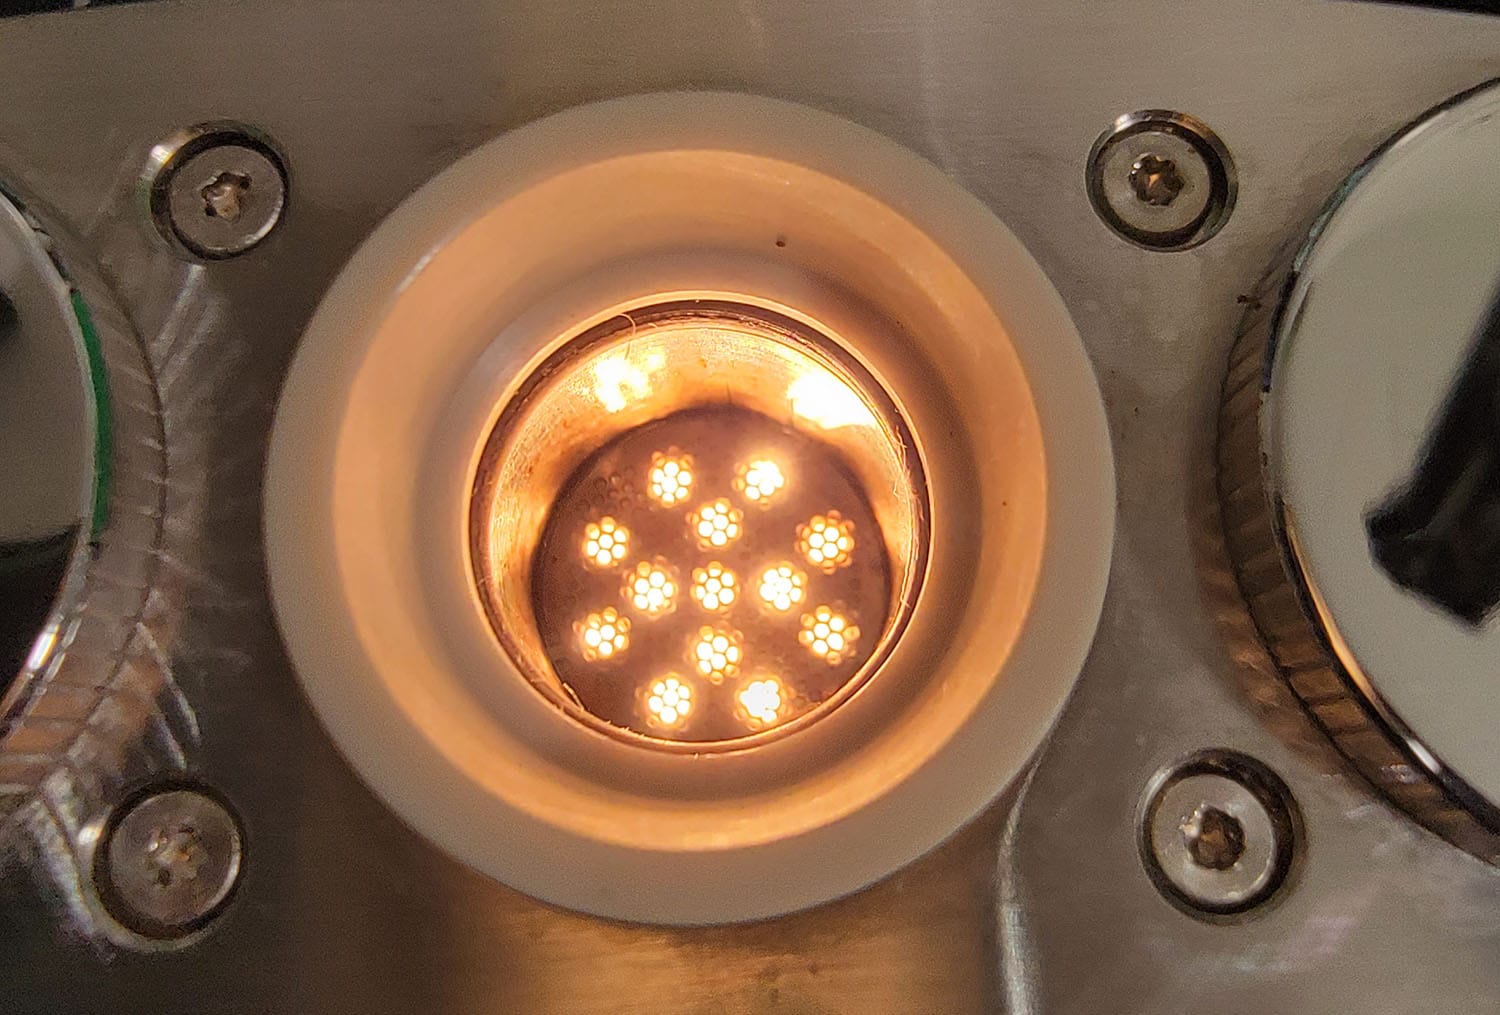 Angus Bowl - Lit up by its halogen bulb heater